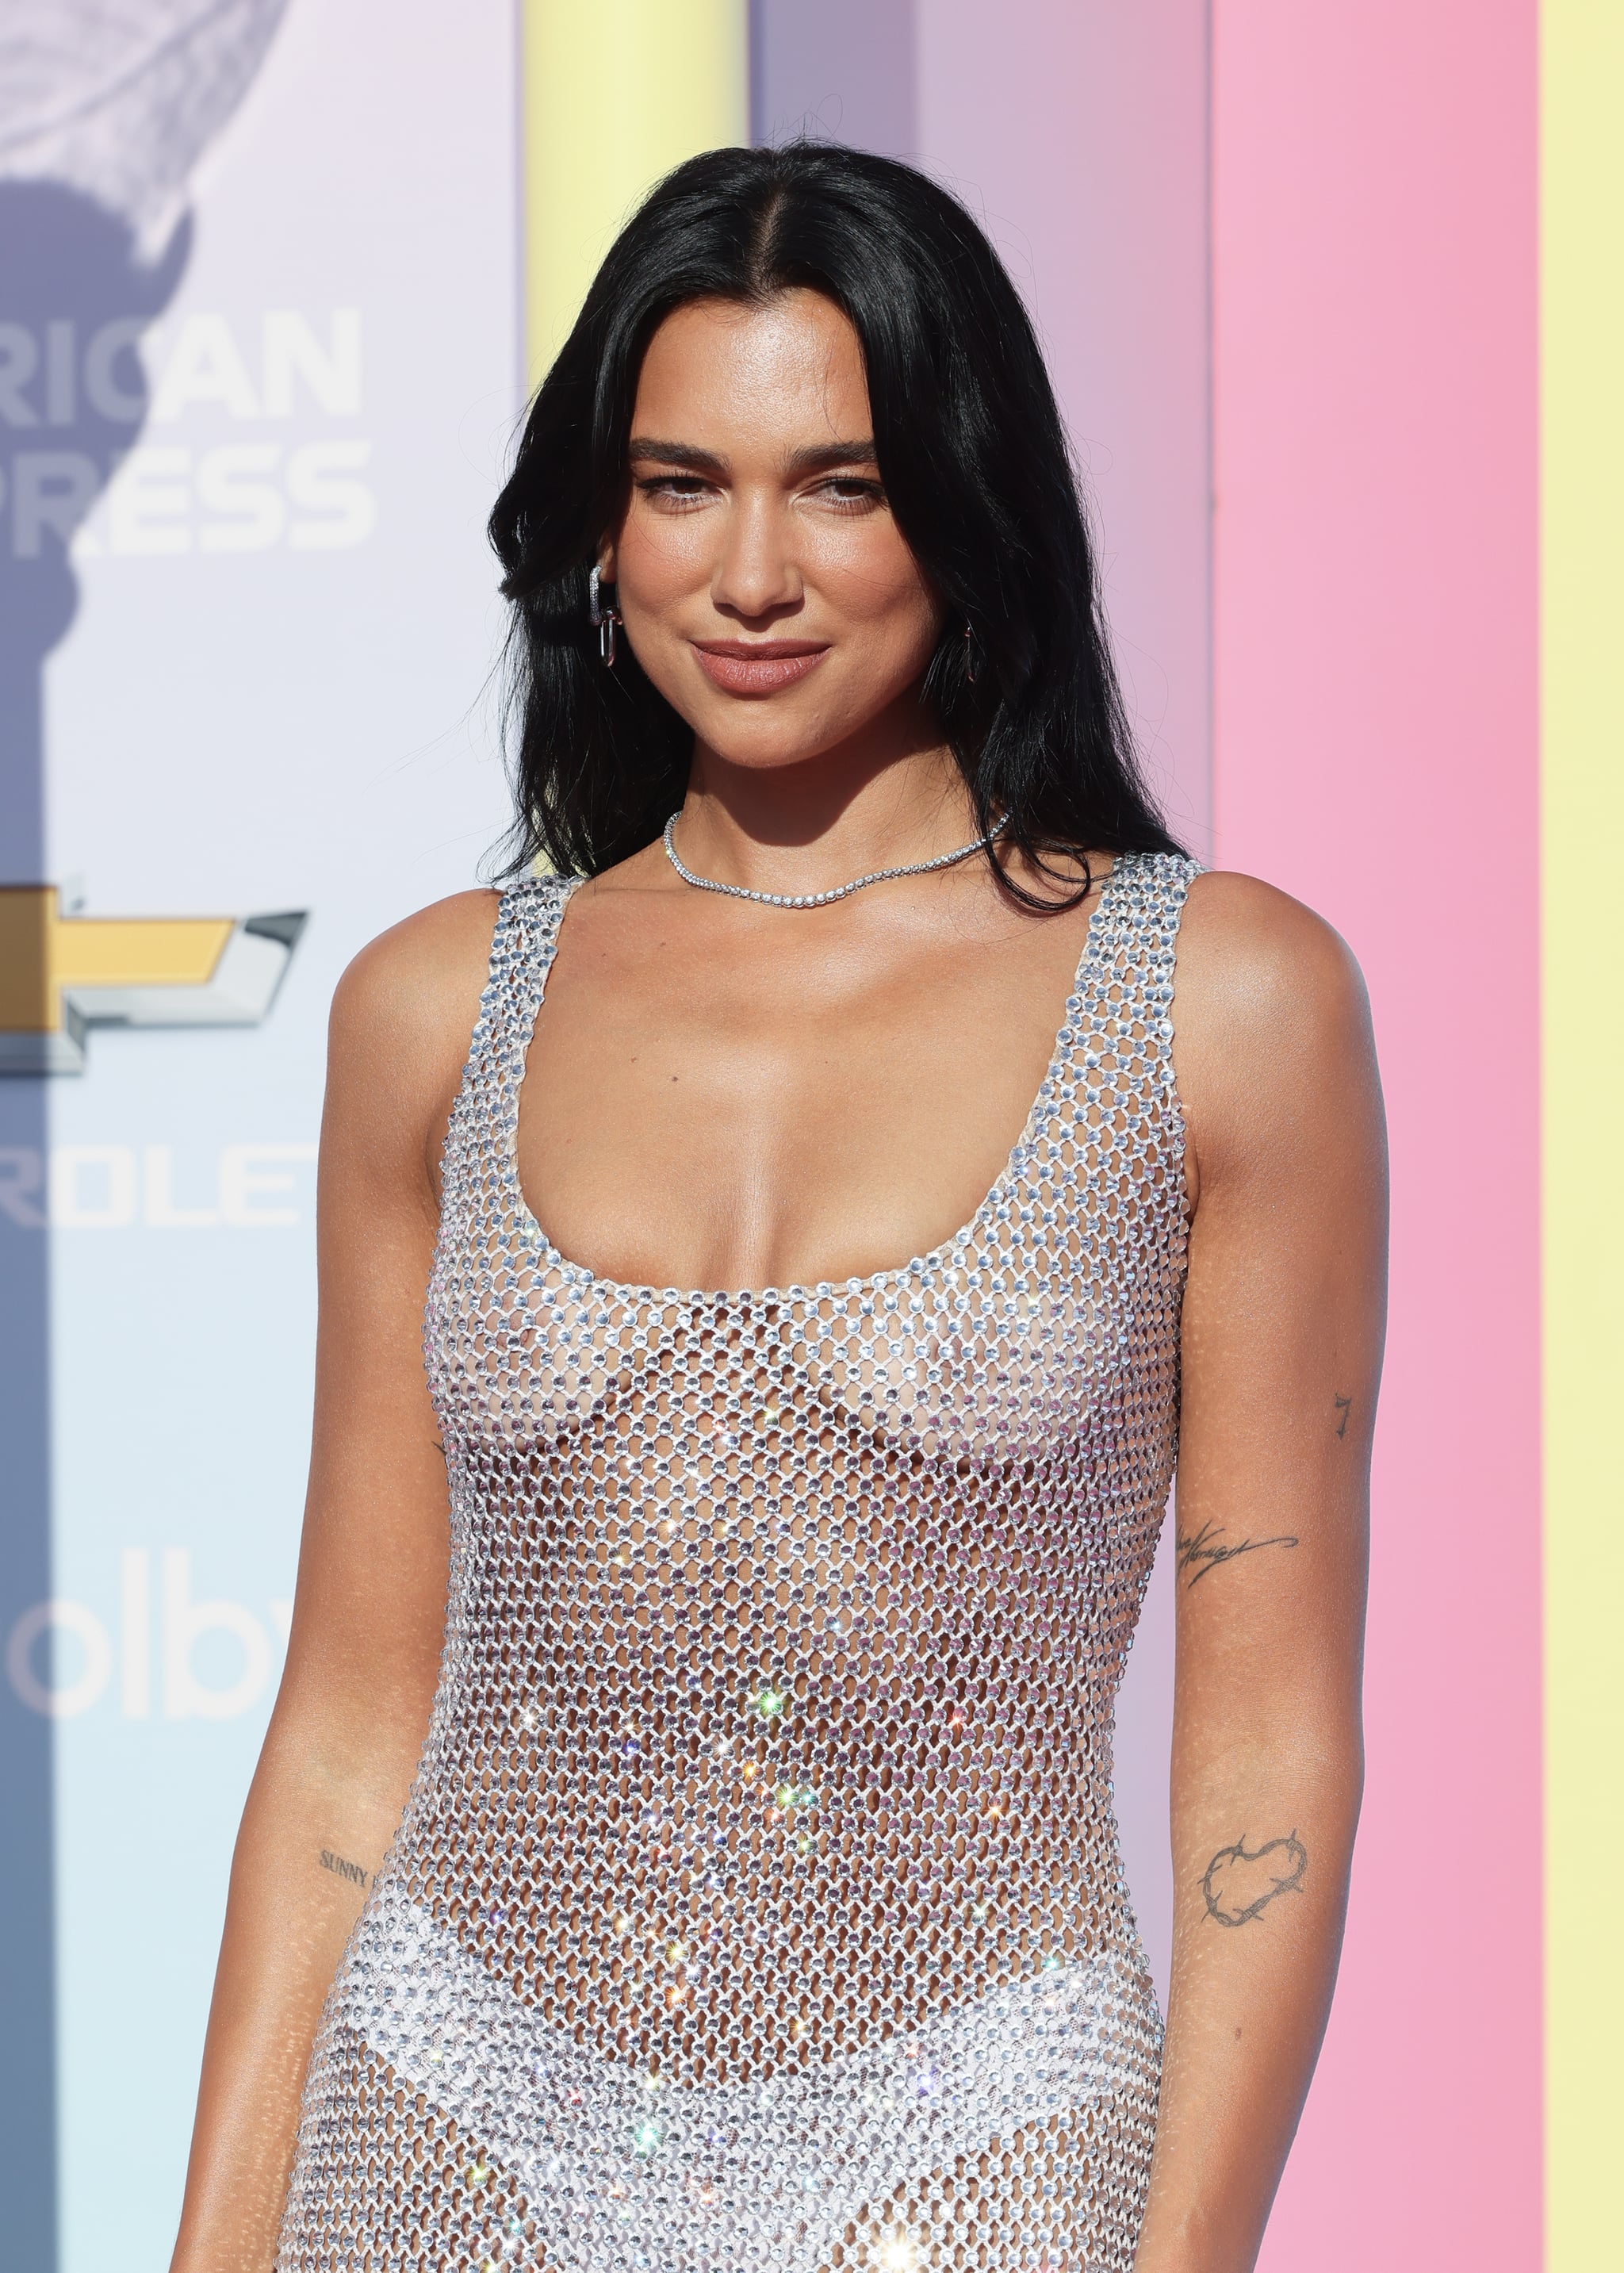 Fashion, Shopping & Style, Dua Lipa Goes Braless In Totally Sheer Naked  Dress for Barbie Premiere